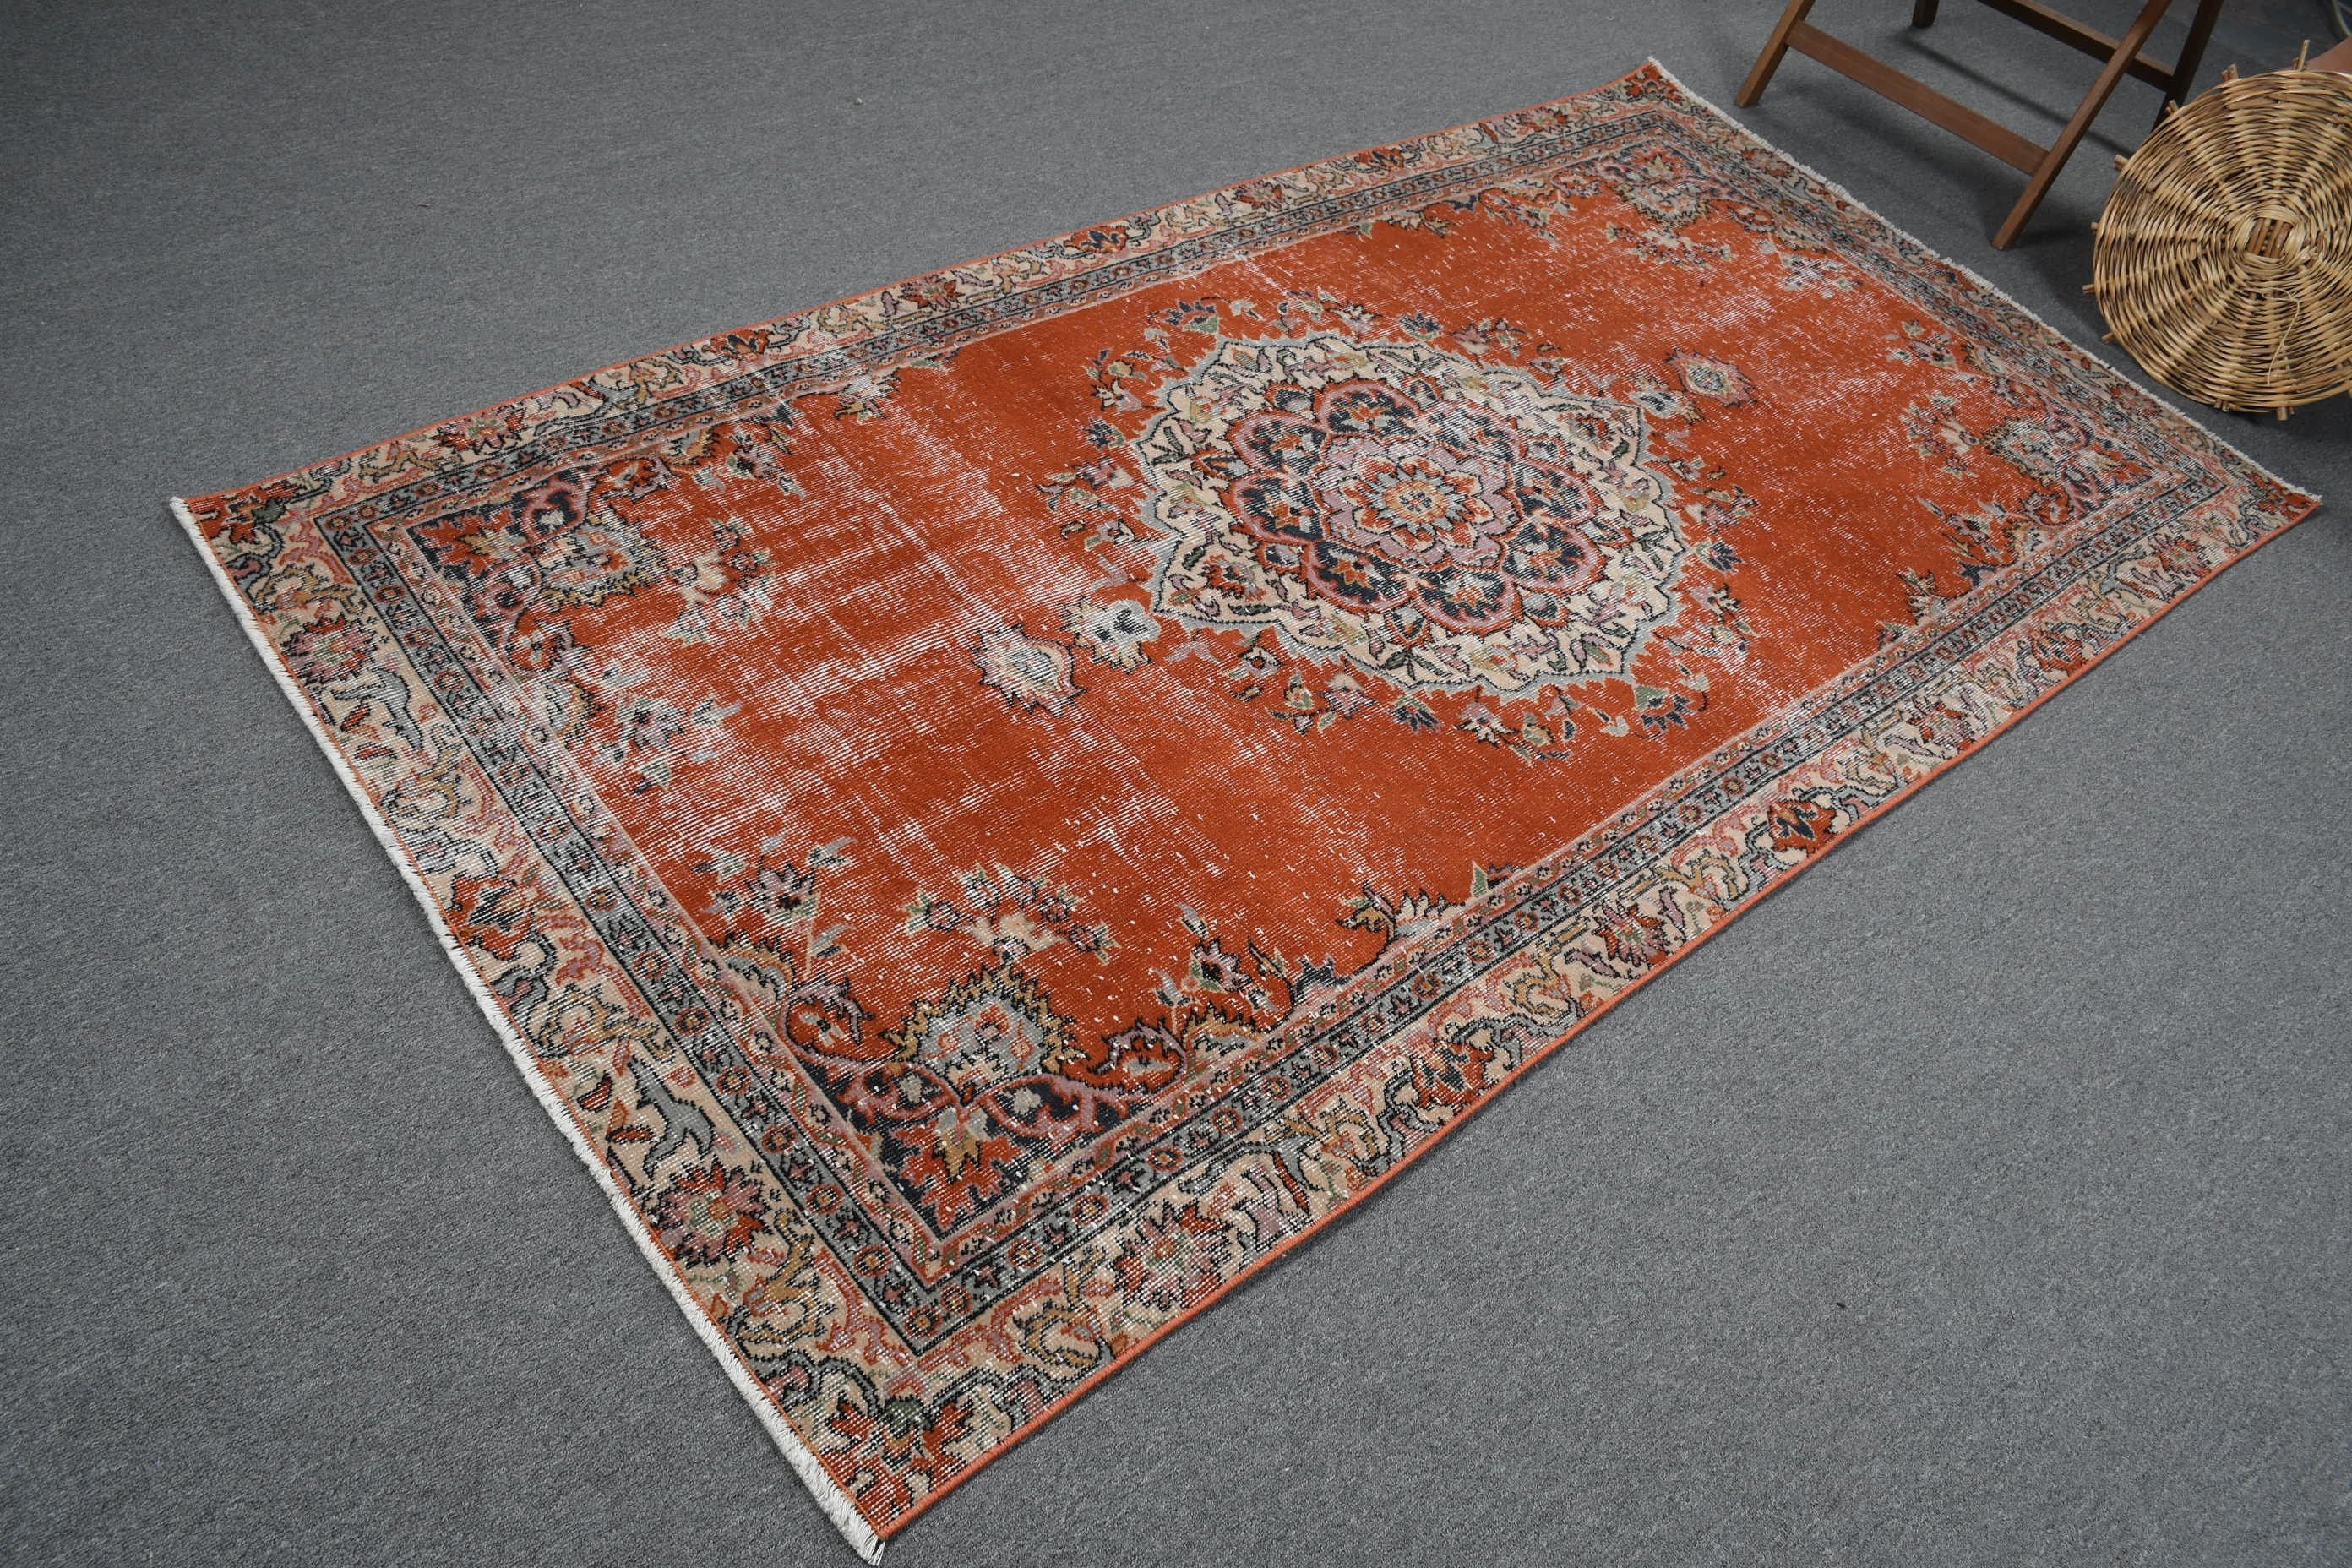 Turkish Rug, Office Rug, Kitchen Rug, Red Home Decor Rug, Living Room Rug, Home Decor Rug, Bedroom Rugs, Vintage Rugs, 4.1x7.9 ft Area Rugs